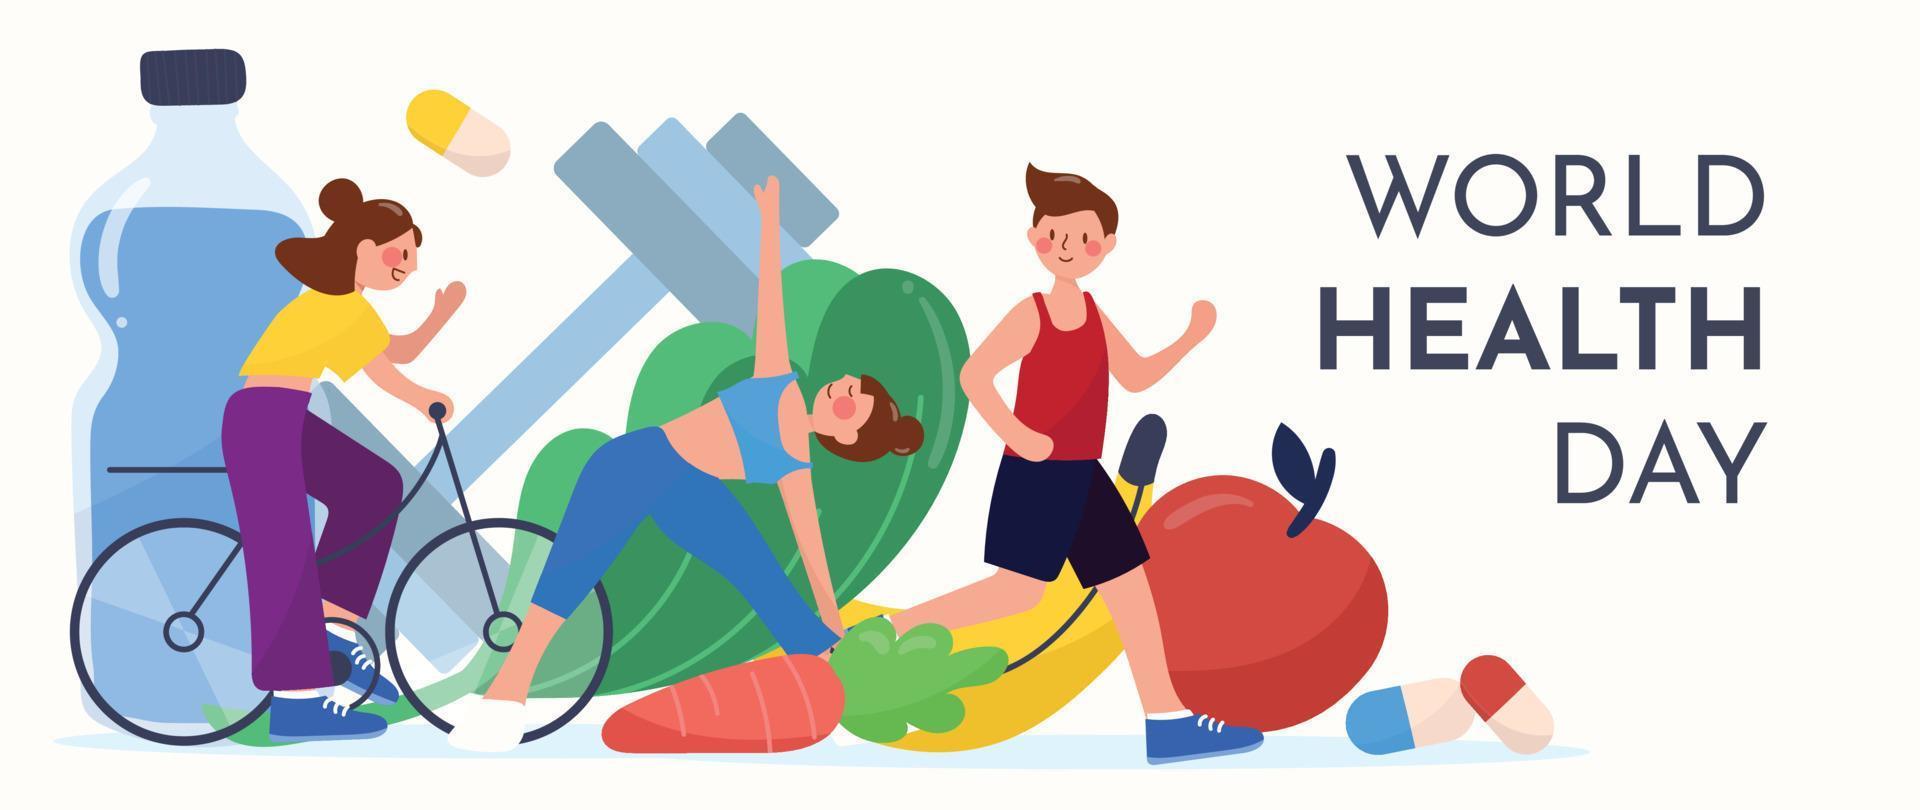 World health day concept, 7 April, background vector. Hand drawn vibrant doodle style of people working out, exercise, sport, medicine, diet food. Design for web, banner, campaign, social media post. vector